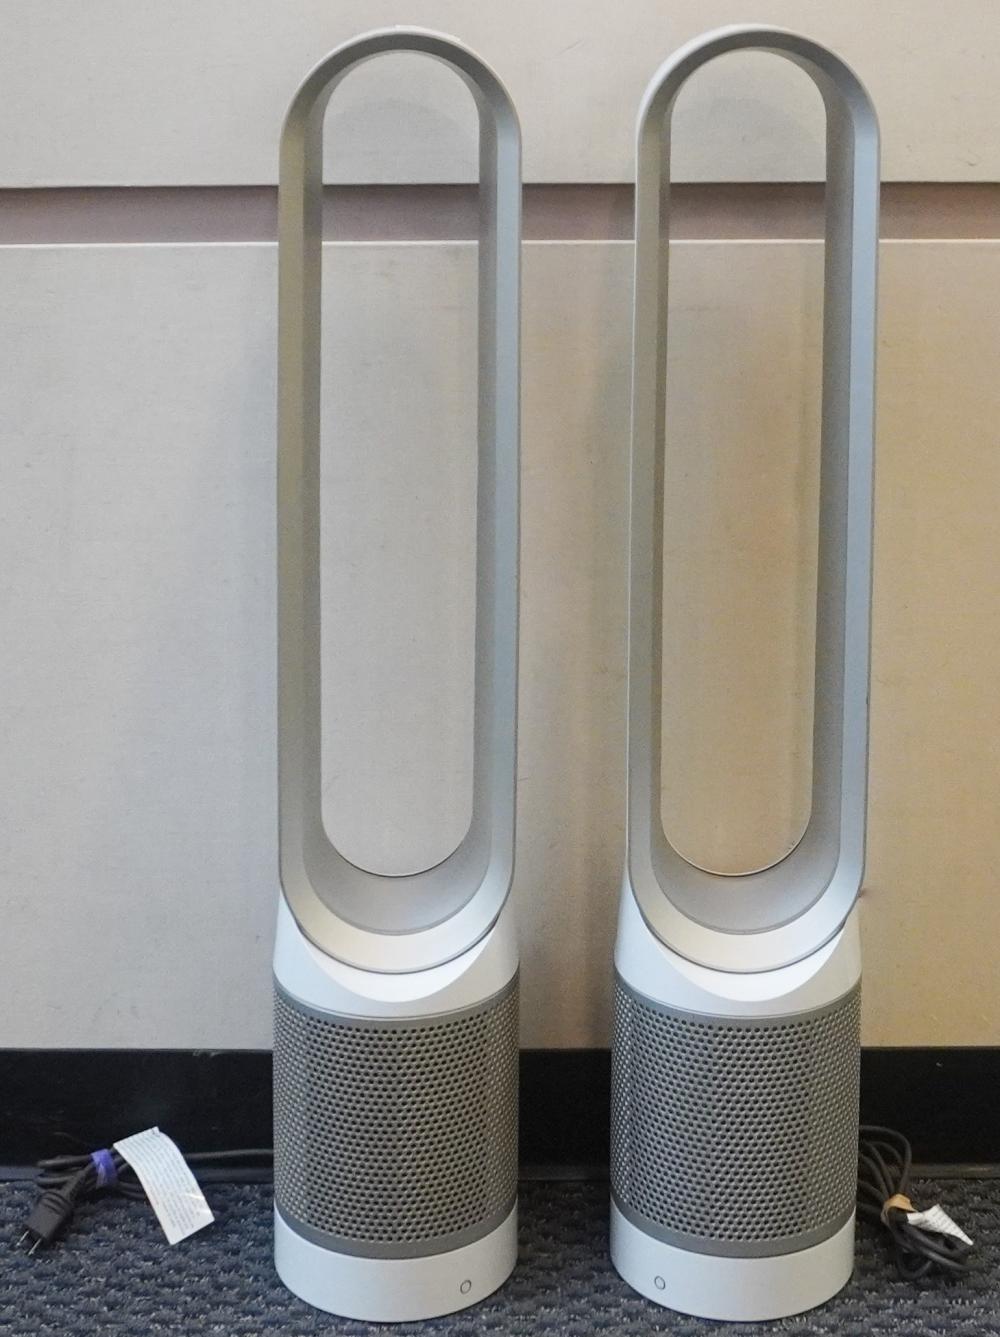 TWO DYSON TOWER AIR PURIFIER FANS 2e5add